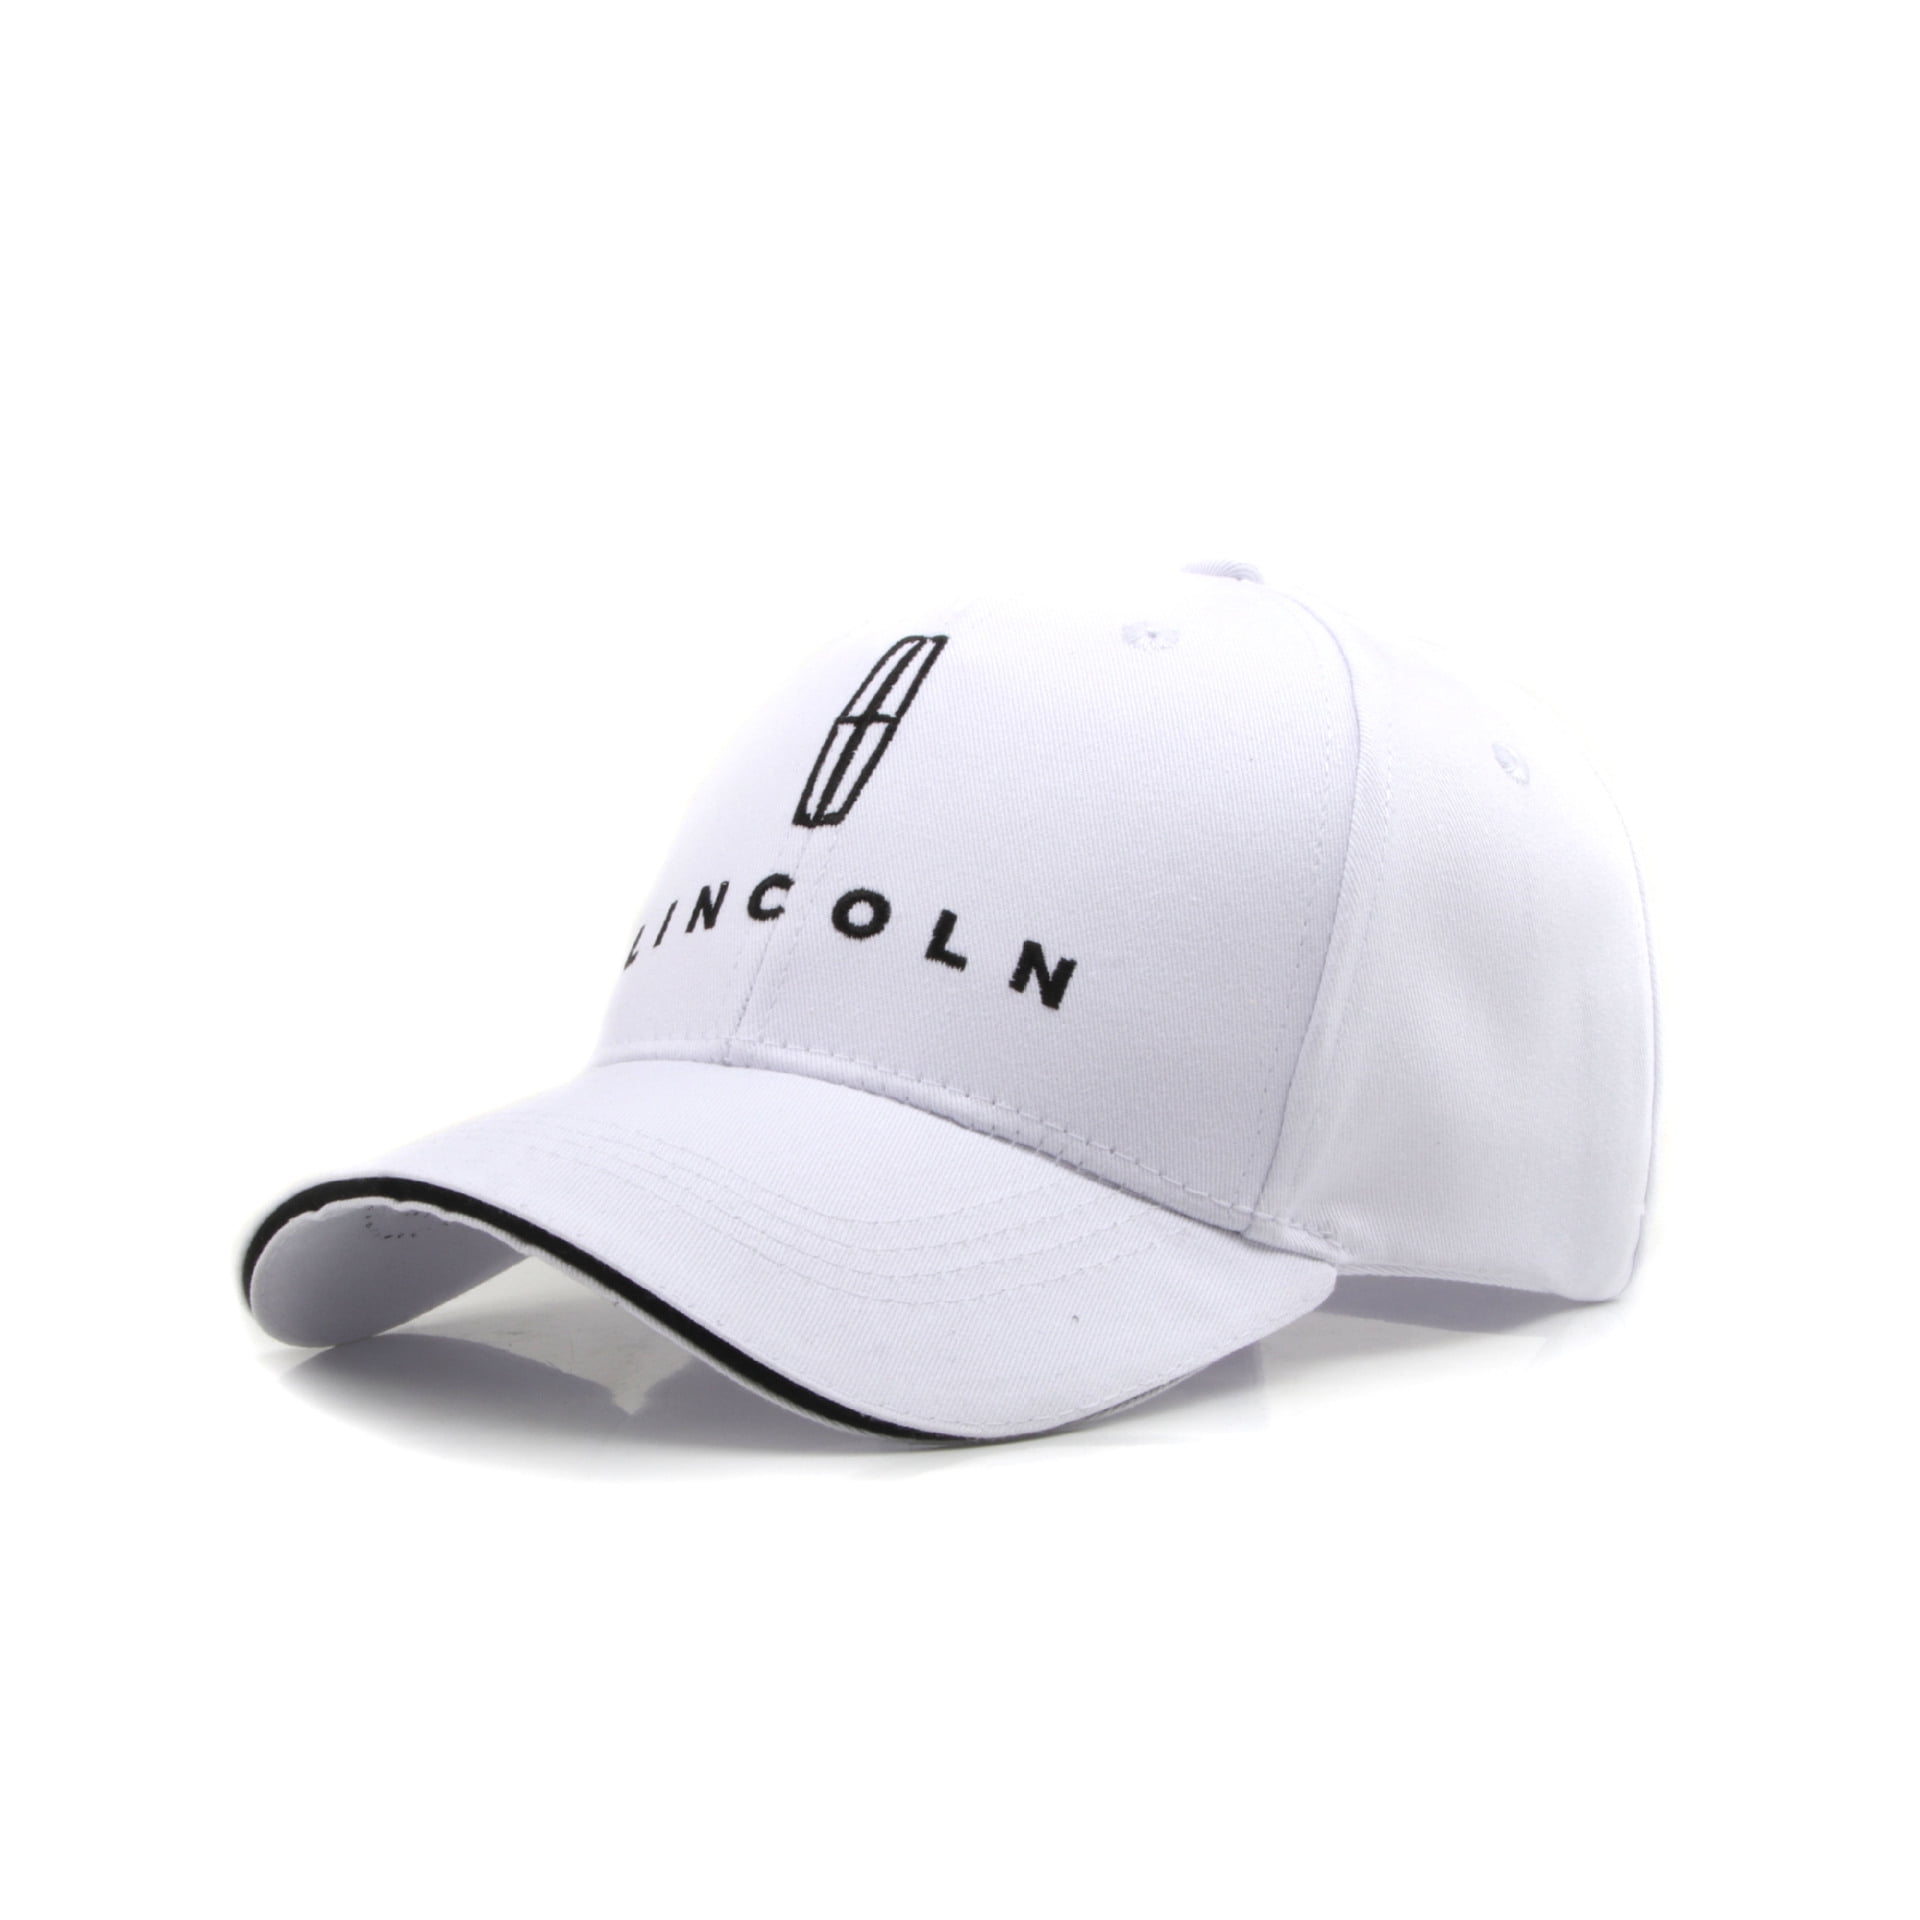 Travel Cap Racing Motor Hat with Car Logo Embroidered Adjustable Baseball Caps for Men and Women 